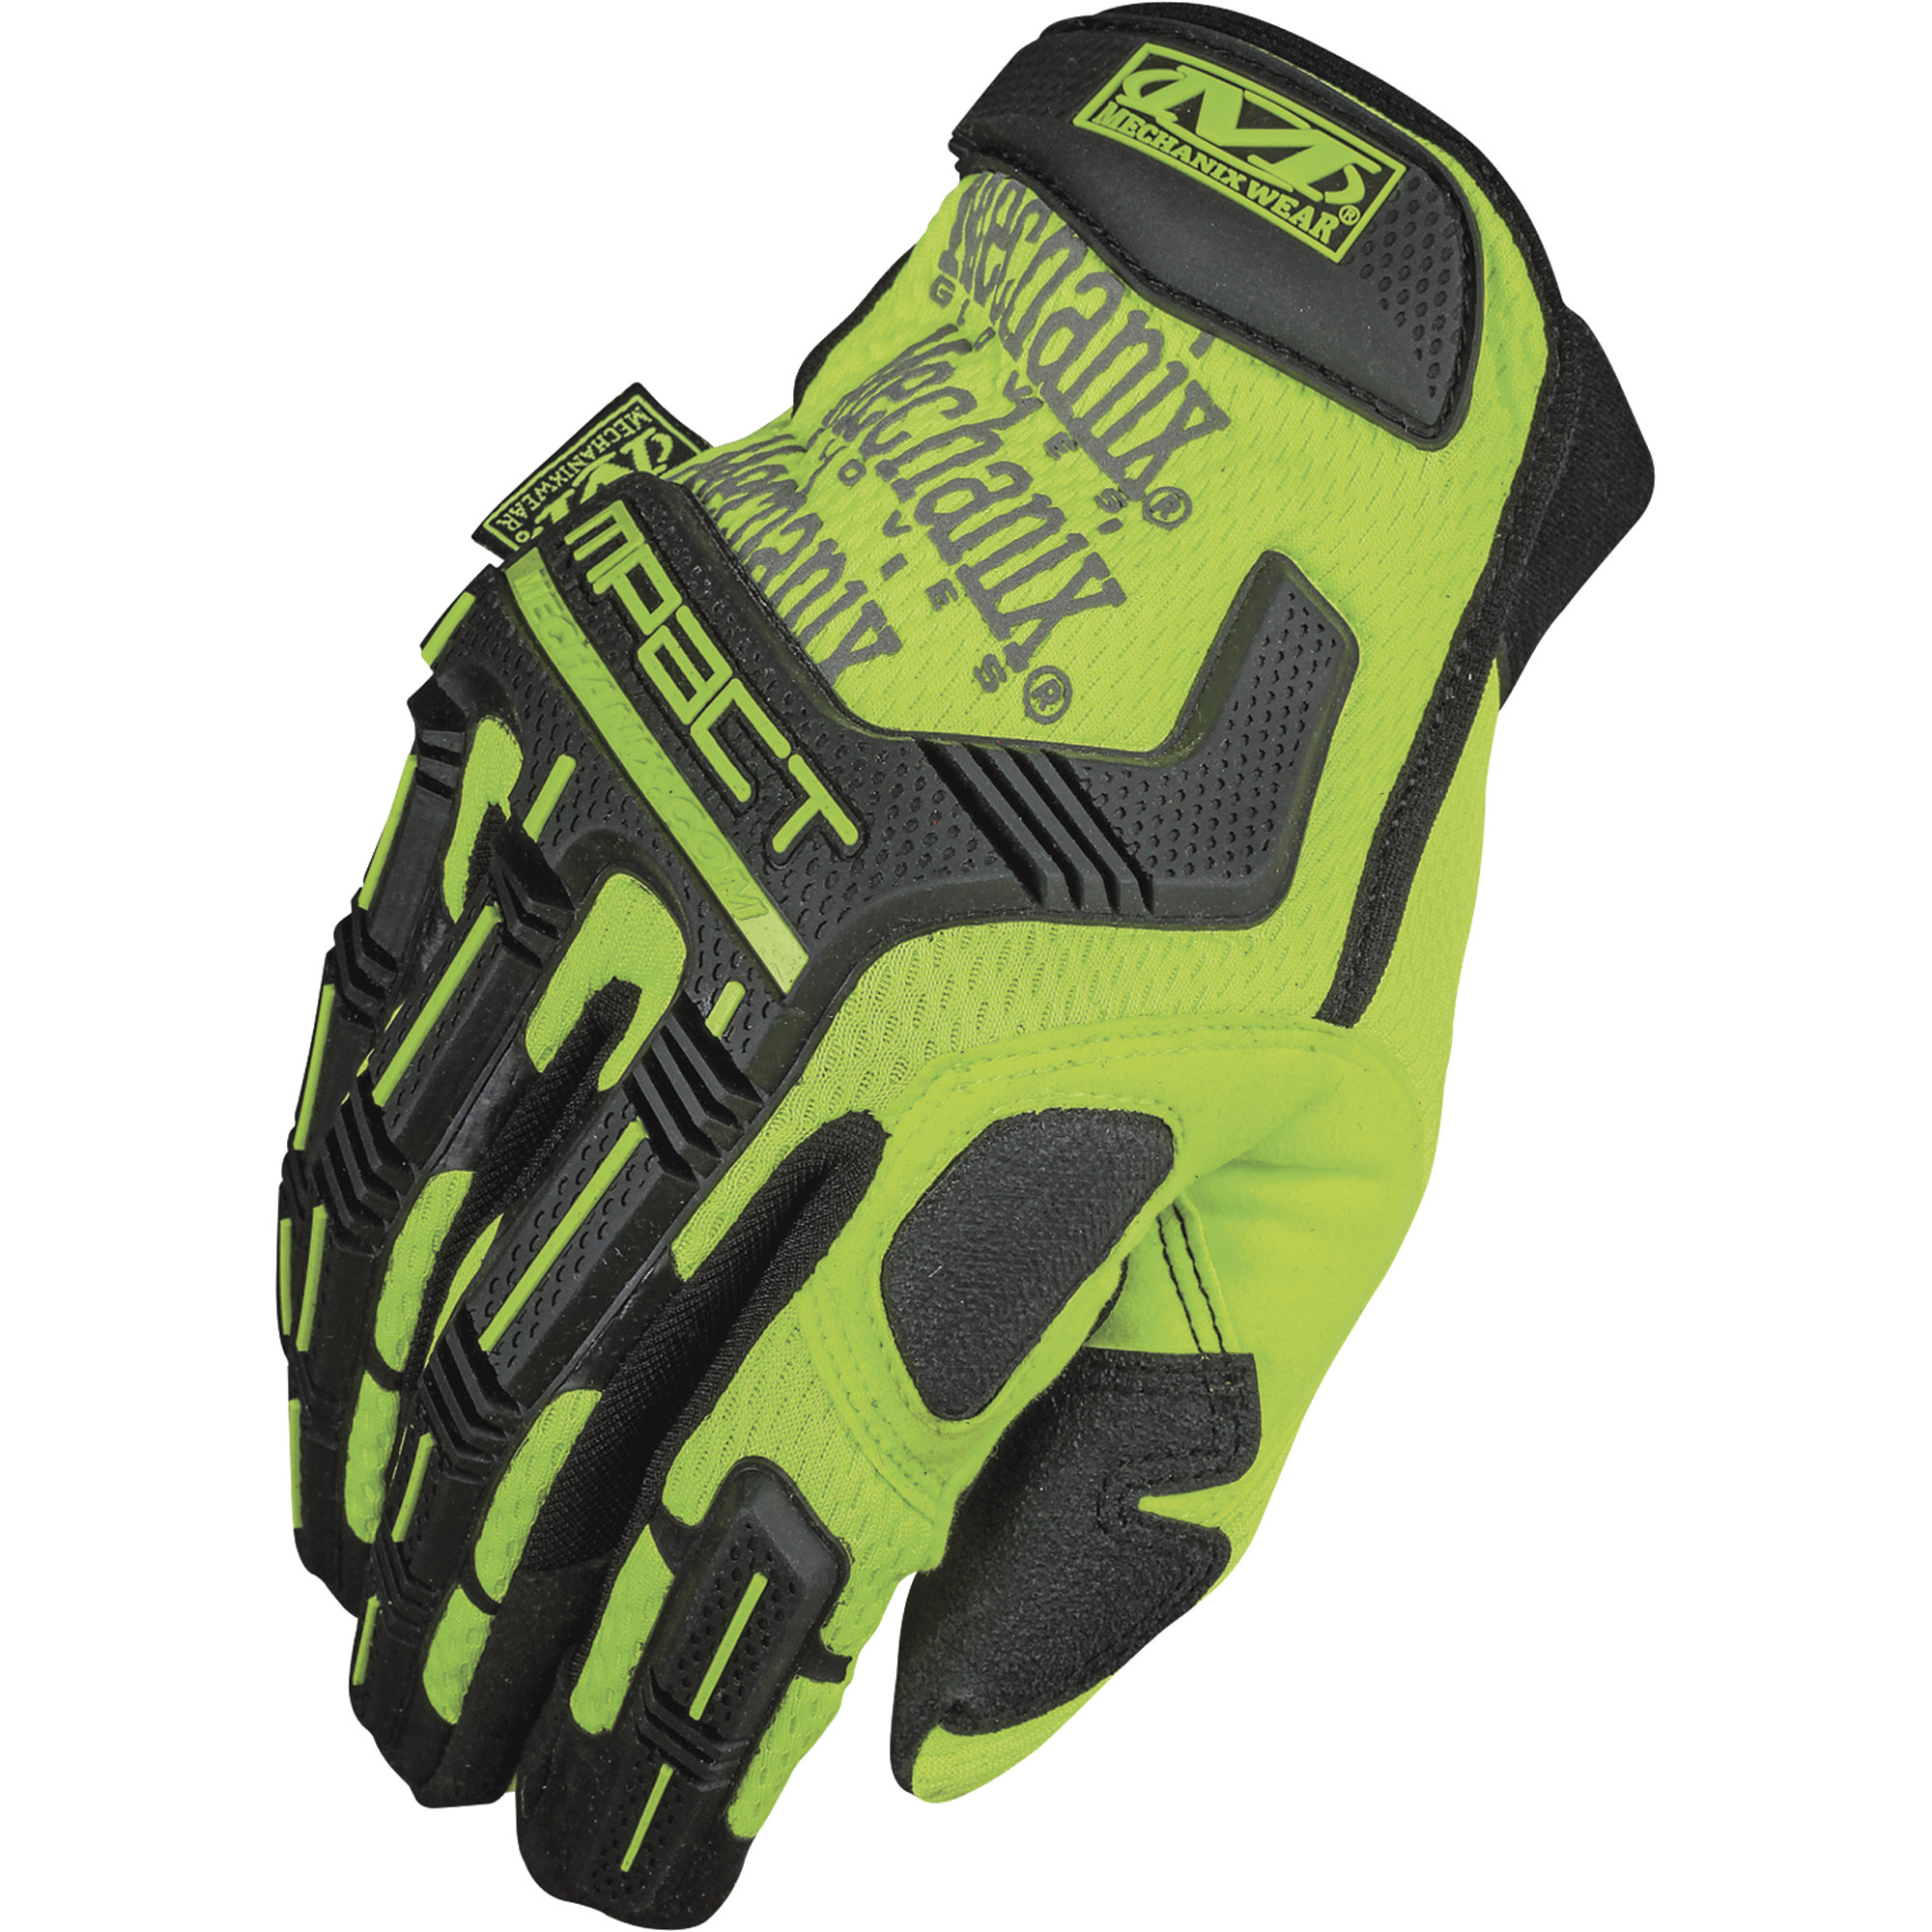 Mechanix Men's Wear Safety M-Pact Gloves - High-Visibility Yellow, XL, Model SMP-91-011